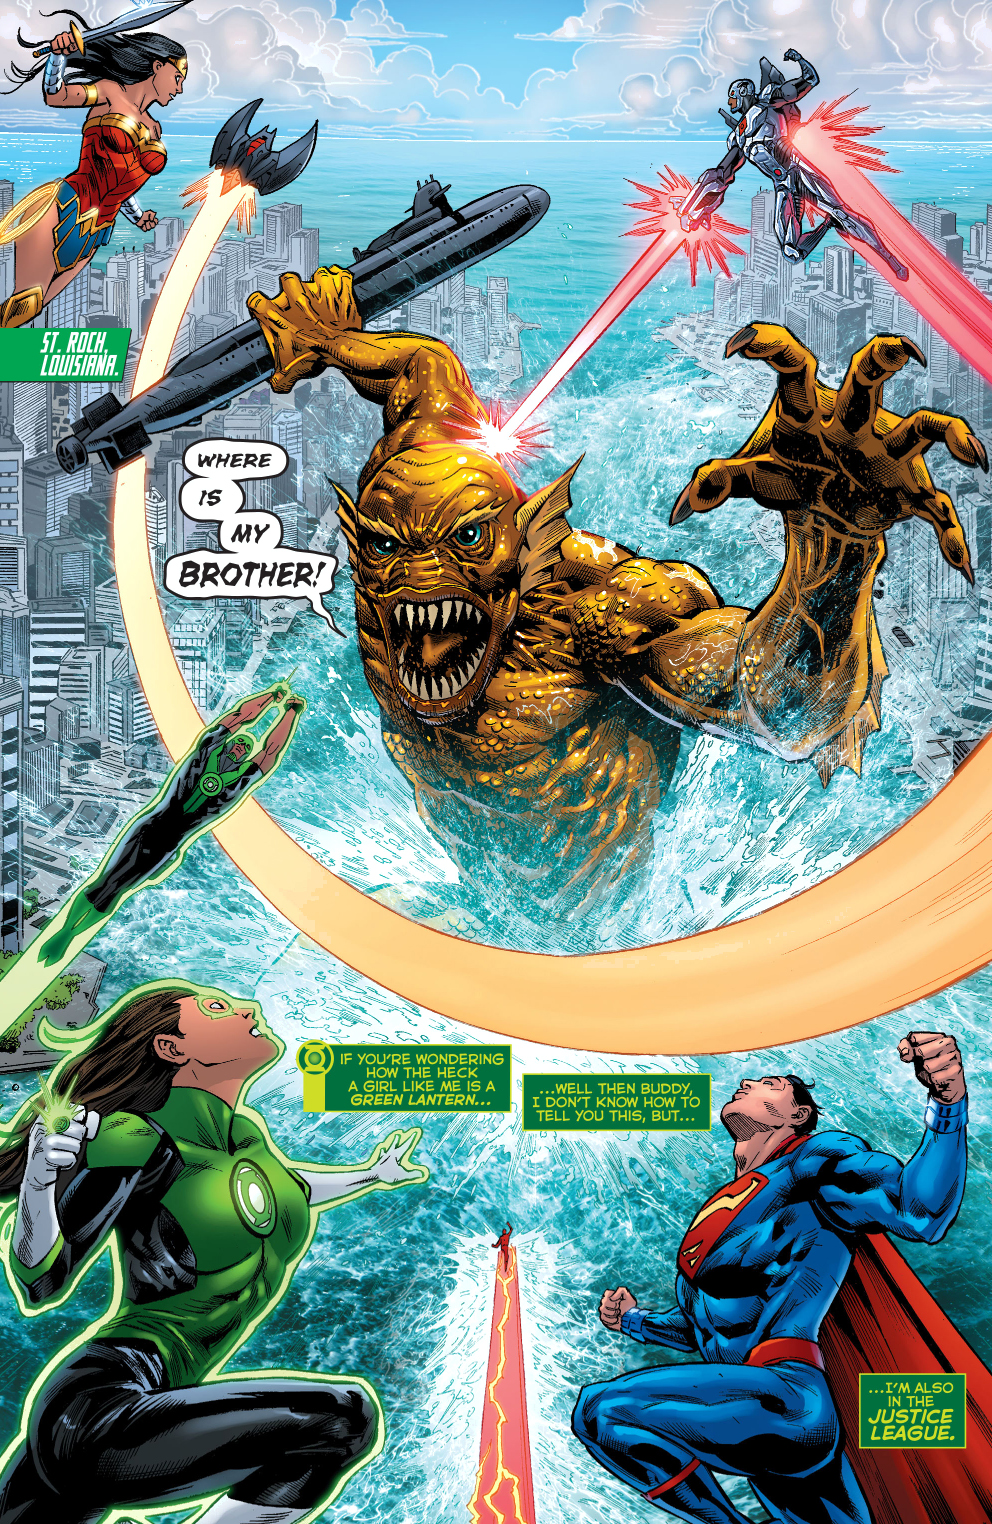 the-justice-league-vs-a-giant-golden-monster